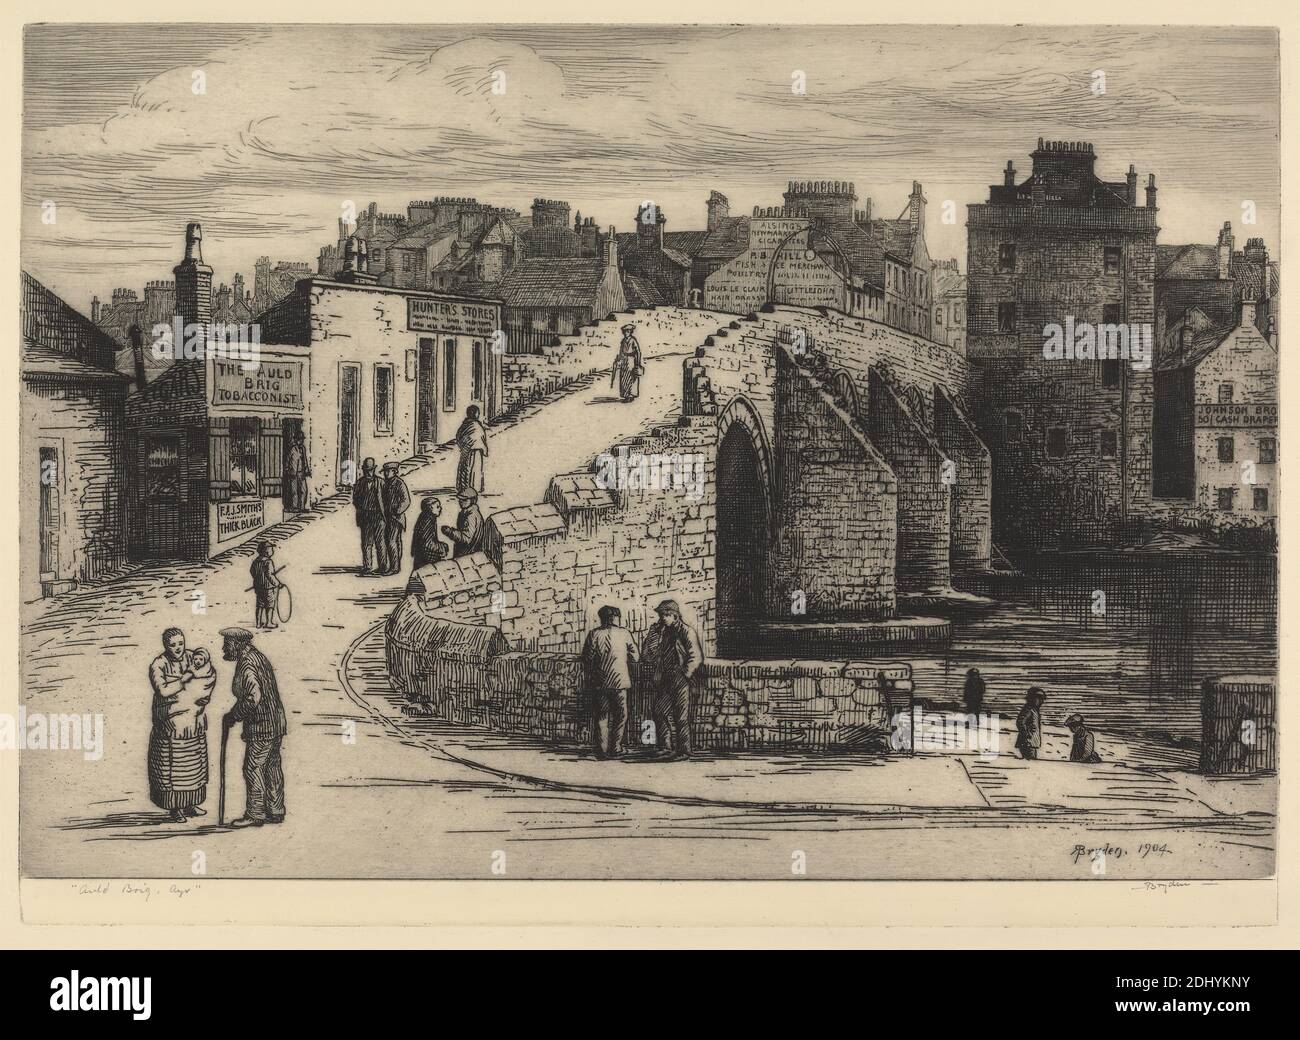 Auld Brig, Ayr, Print made by Robert Bryden, 1865–1939, British, 1904, Etching and drypoint on moderately thick, slightly textured, cream laid paper, Plate: 9 15/16 x 13 7/8 inches (25.3 x 35.3 cm), Sheet: 12 3/4 x 16 1/8 inches (32.4 x 41 cm), and Image: 9 7/16 x 13 7/8 inches (24 x 35.3 cm), arches, architectural subject, boys, bridge (built work), buildings, caps (headgear), children, cityscape, coats, genre subject, hats, infant, men, mother, parasol, river, road, staff (walking stick), stores, street, talking, town, toys (recreational artifacts), trousers, village, walking, wall, women Stock Photo